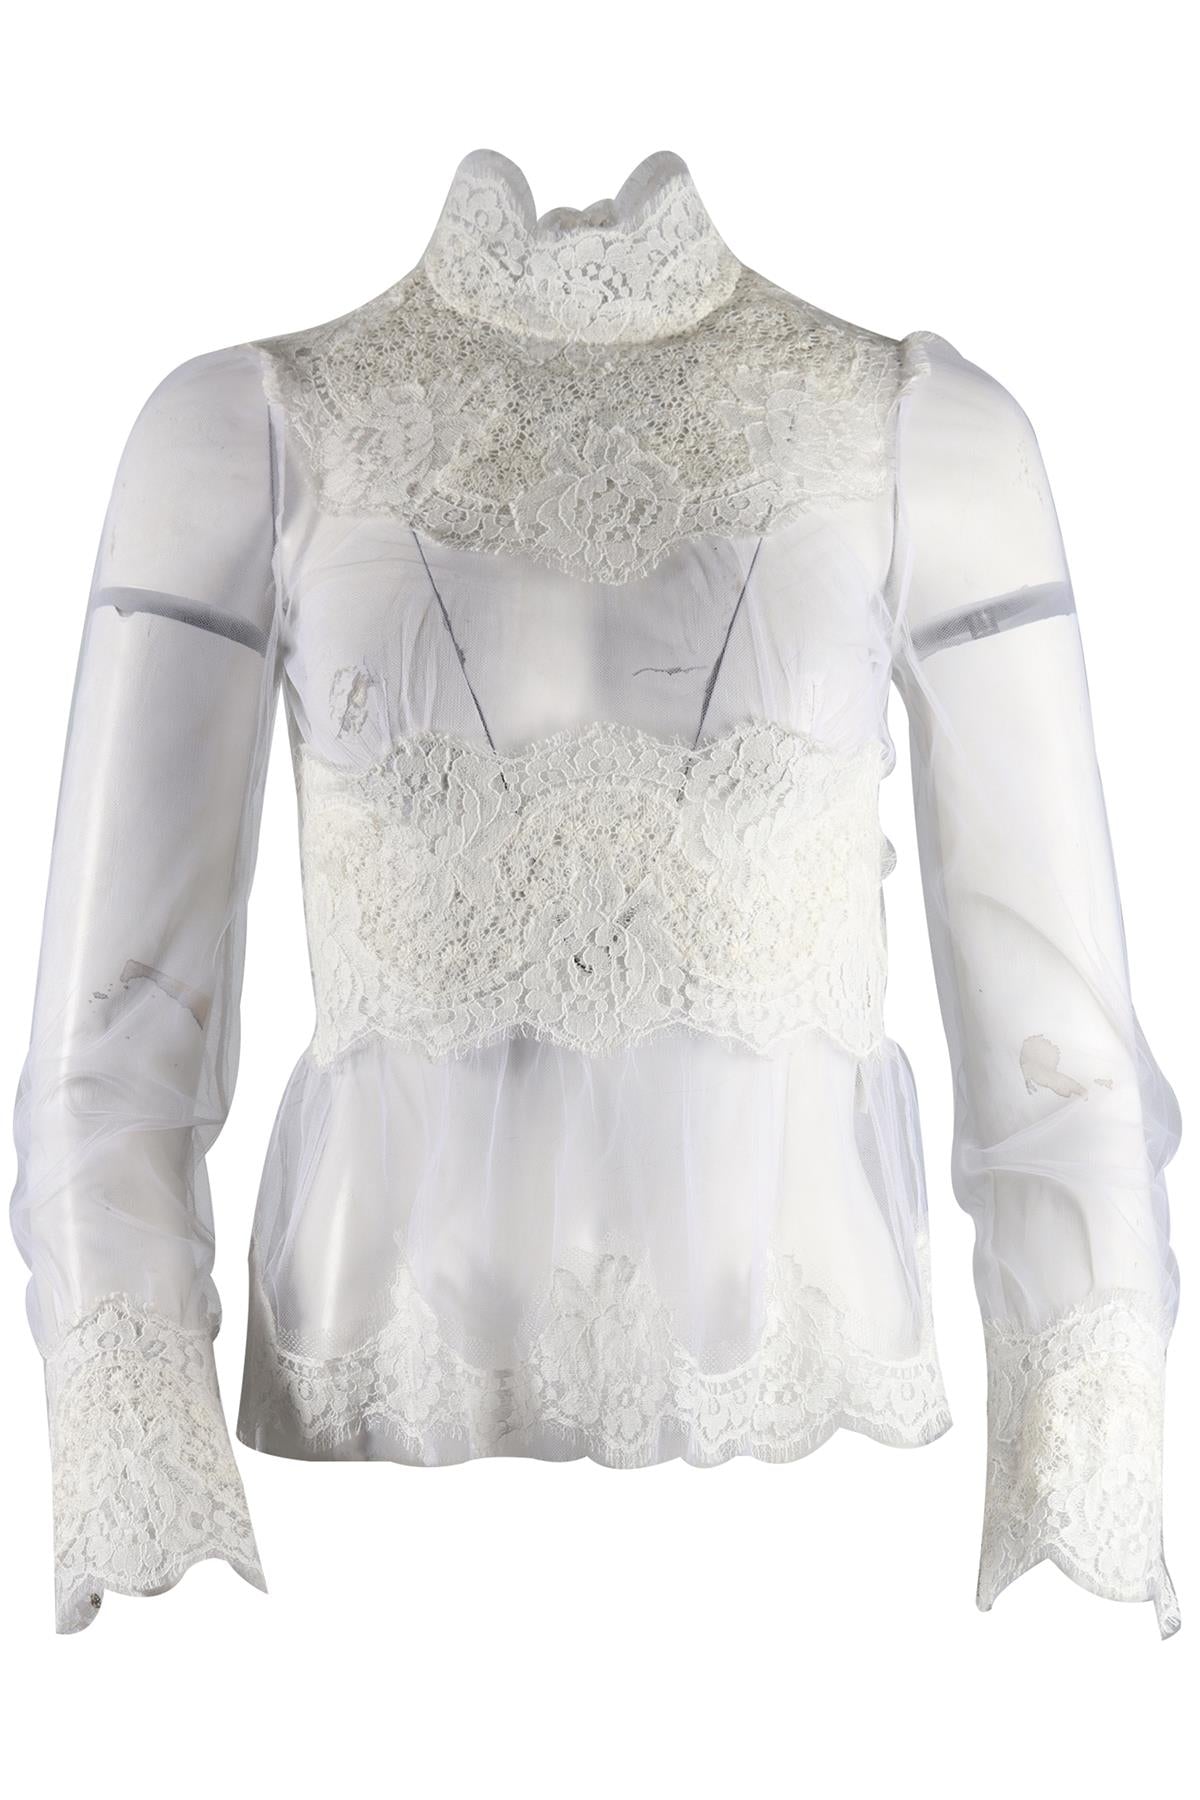 DOLCE & GABBANA LACE AND MESH TOP IT 38 UK 6